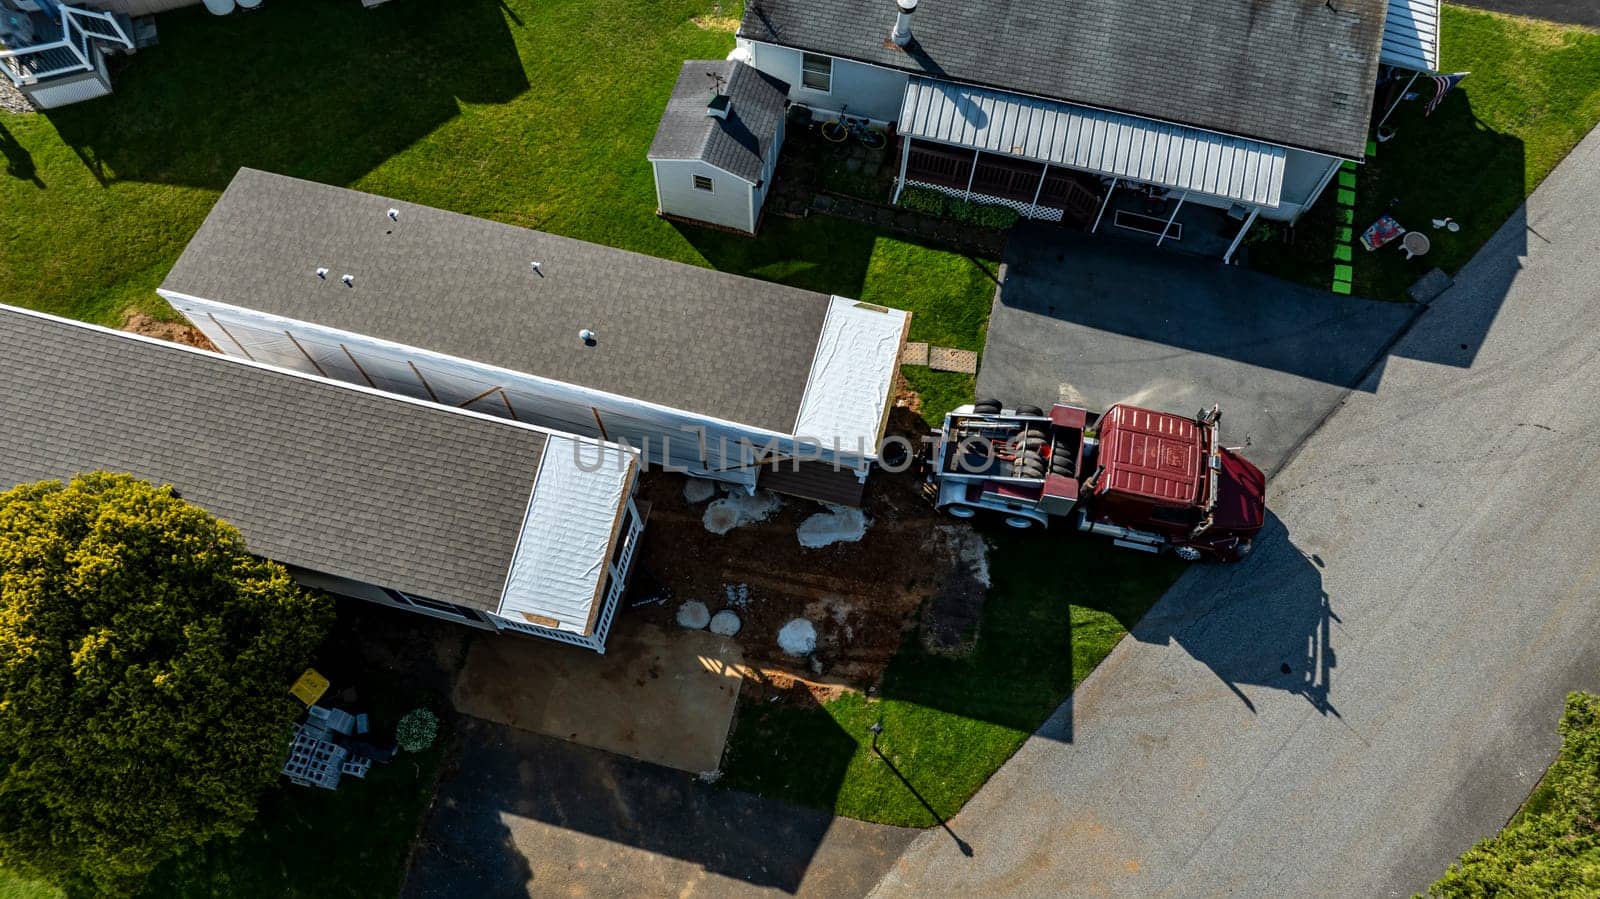 Aerial View of a Manufactured, Mobile, Prefab Double Wide Home Being Installed in a Lot in a Park by actionphoto50